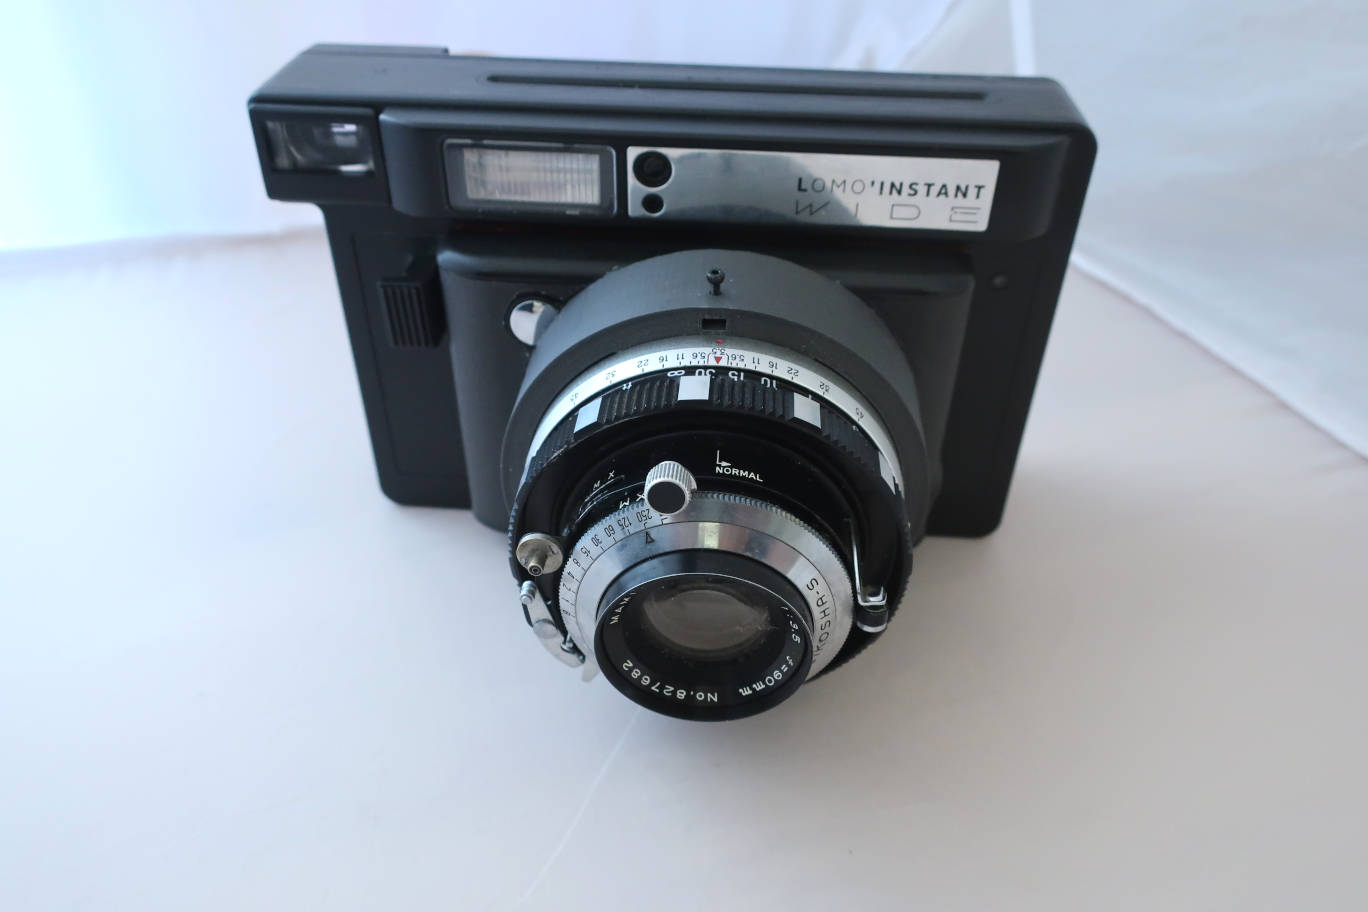 Manual Lomo Instant Wide with interchangeable lenses or Lomo 